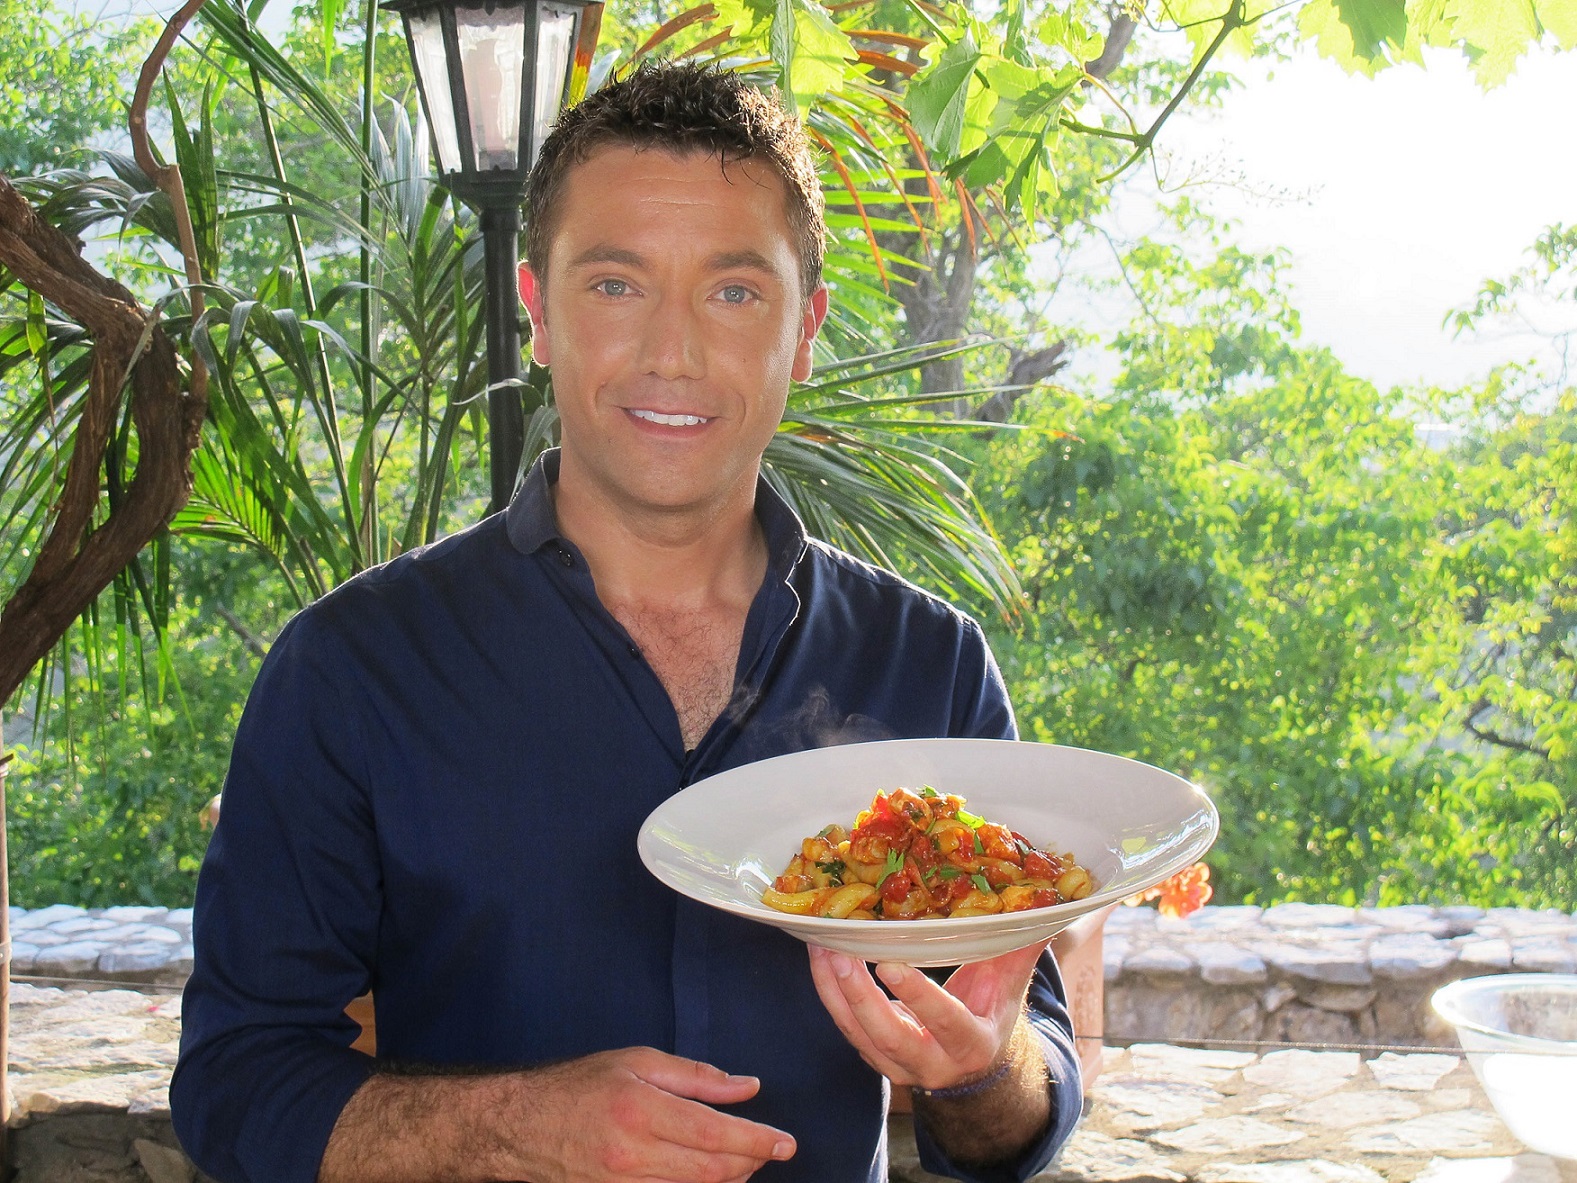 FROM ITV STUDIOS GINO'S ITALIAN ESCAPE Ep 5 Friday 11th October 2013 on ITV Pictured: Gino D'Acampo cooks GragnanoÕs legendary pasta with salmon in a spicy arrabbiata sauce in a corner of a orchard In episode five, Gino returns to his native Campania, the Italian region where he grew up and where his family still live. As a chef, he is eager to visit the town of Gragnano, which is world-famous for its pasta. Gino tours this unique place, where a combination of natural elements, sea breezes, hot sunshine and mountain water, have contributed to producing outstanding pasta. Our chef visits one of the townÕs historic pasta factories, where local ladies teach him the traditional skill of hand-rolling long fusilli. © ITV For further information please contact Peter Gray 0207 157 3046 peter.gray@itv.com This photograph is (C) ITV and can only be reproduced for editorial purposes directly in connection with the programme ITV. Once made available by the ITV Picture Desk, this photograph can be reproduced once only up until the Transmission date and no reproduction fee will be charged. Any subsequent usage may incur a fee. This photograph must not be syndicated to any other publication or website, or permanently archived, without the express written permission of ITV Picture Desk. Full Terms and conditions are available on the website www.itvpictures.com